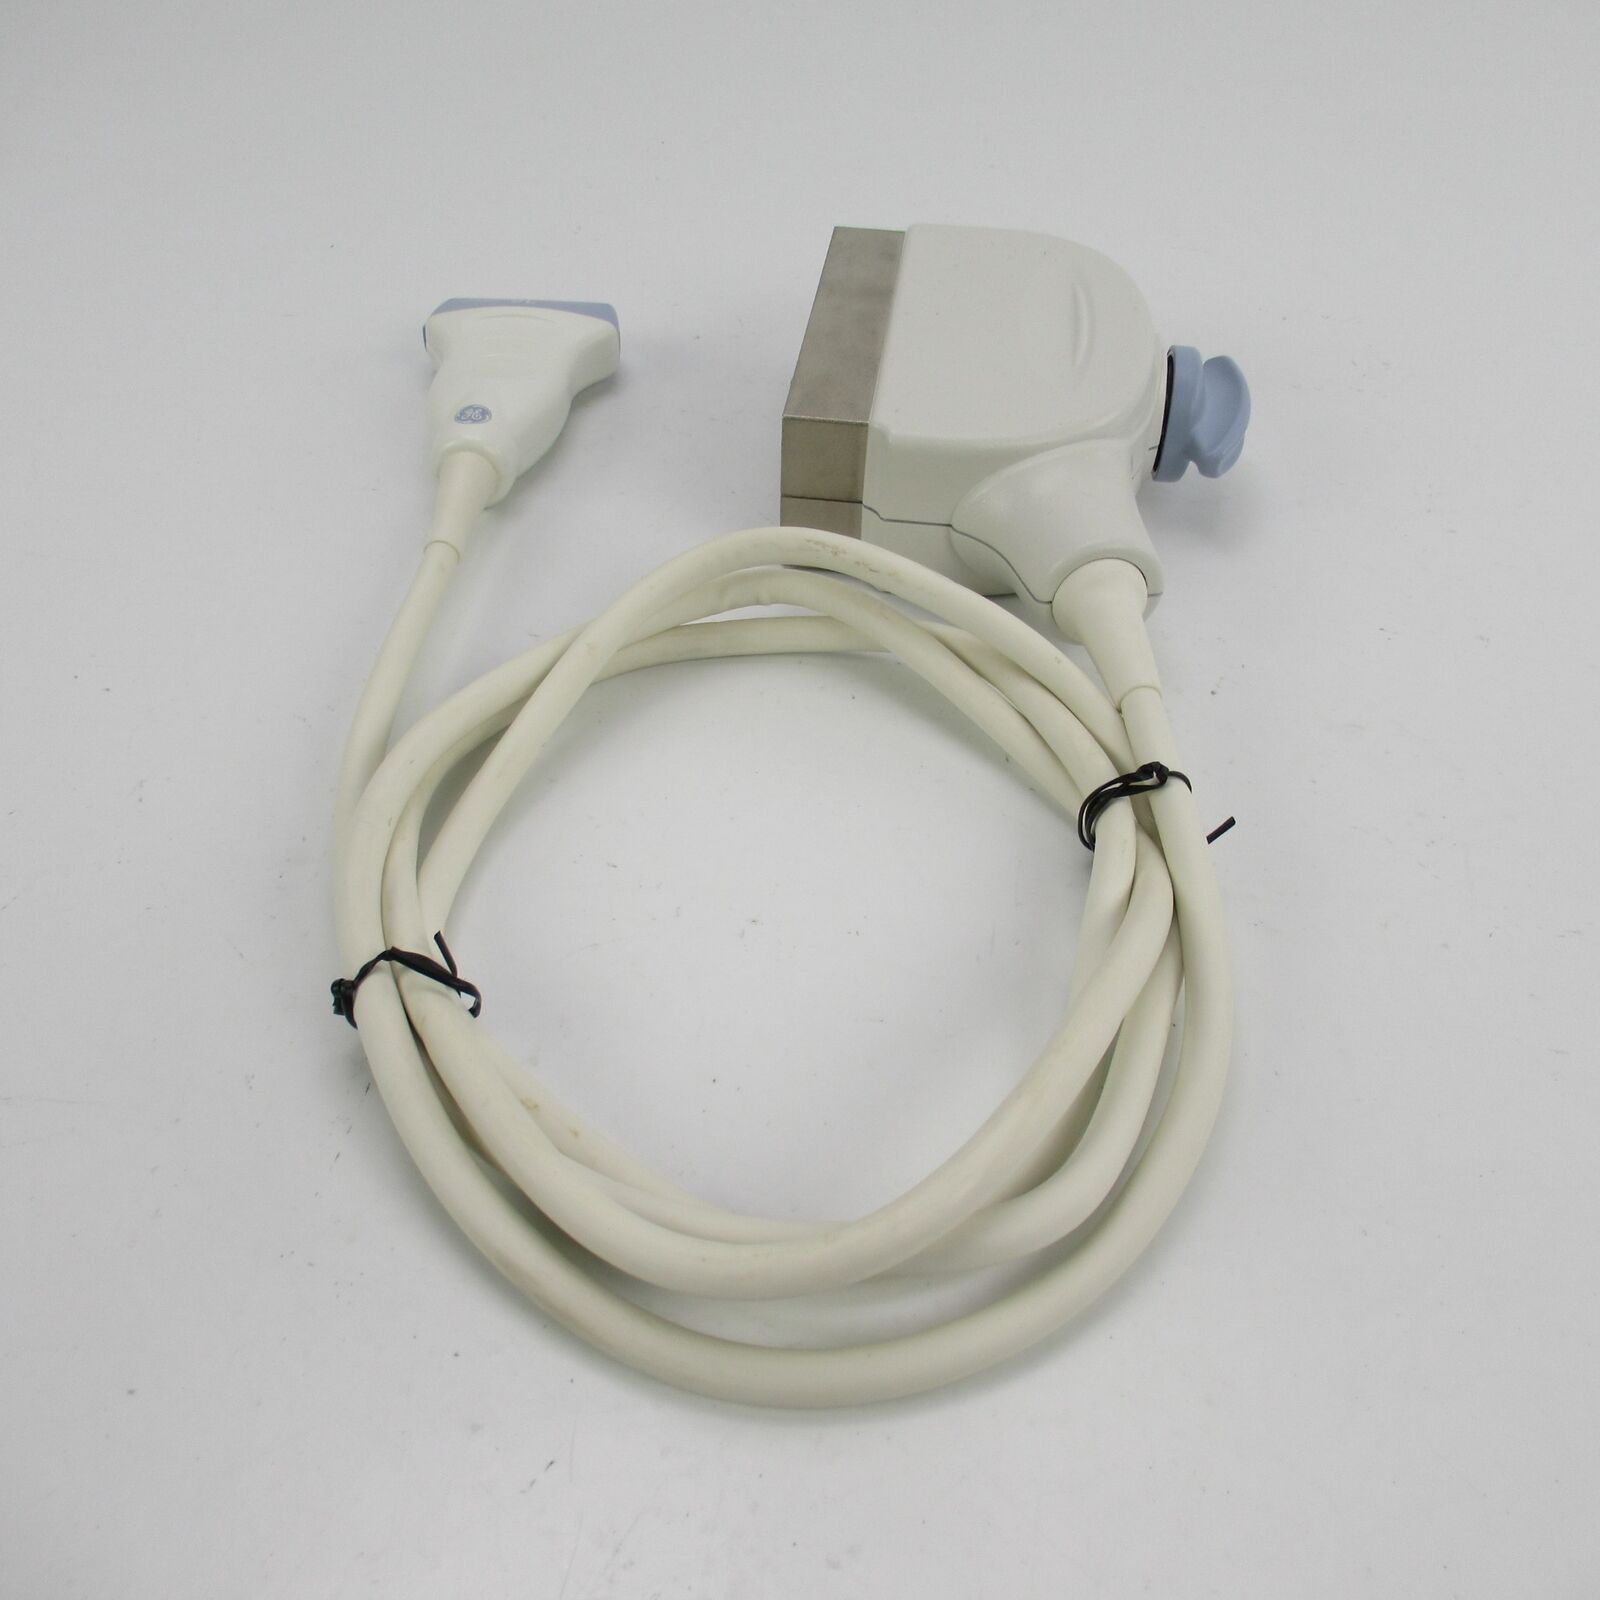 GE 9L LINEAR TRANSDUCER PROBE FOR VIVID & LOGIQ ULTRASOUND SYSTEMS 5131433